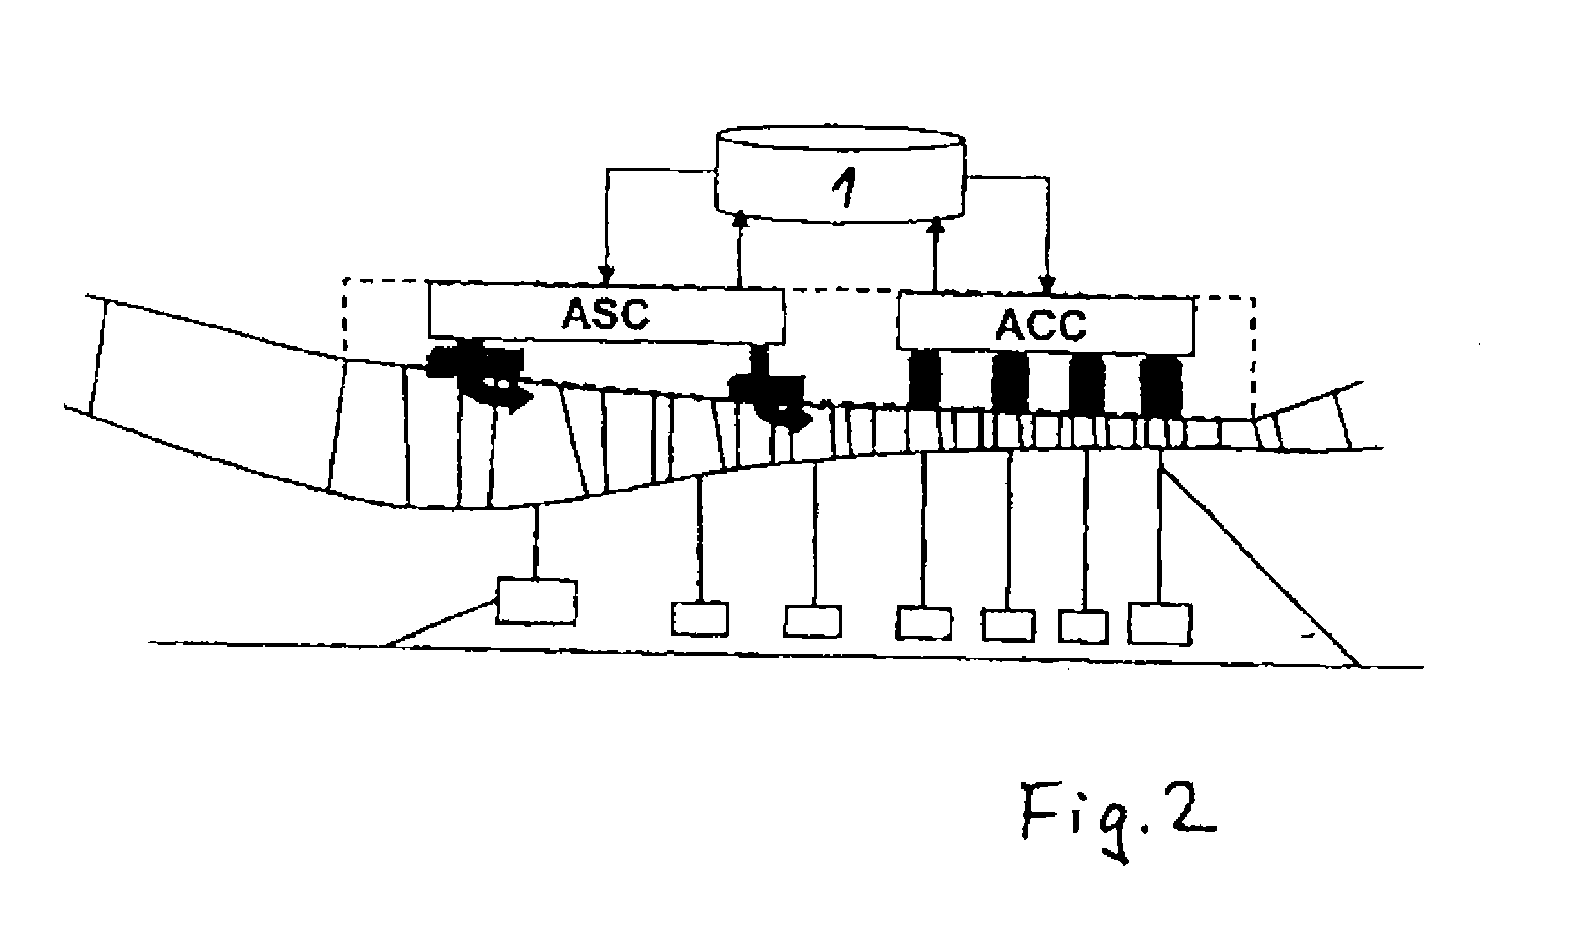 Closed-loop control for a gas turbine with actively stabilized compressor